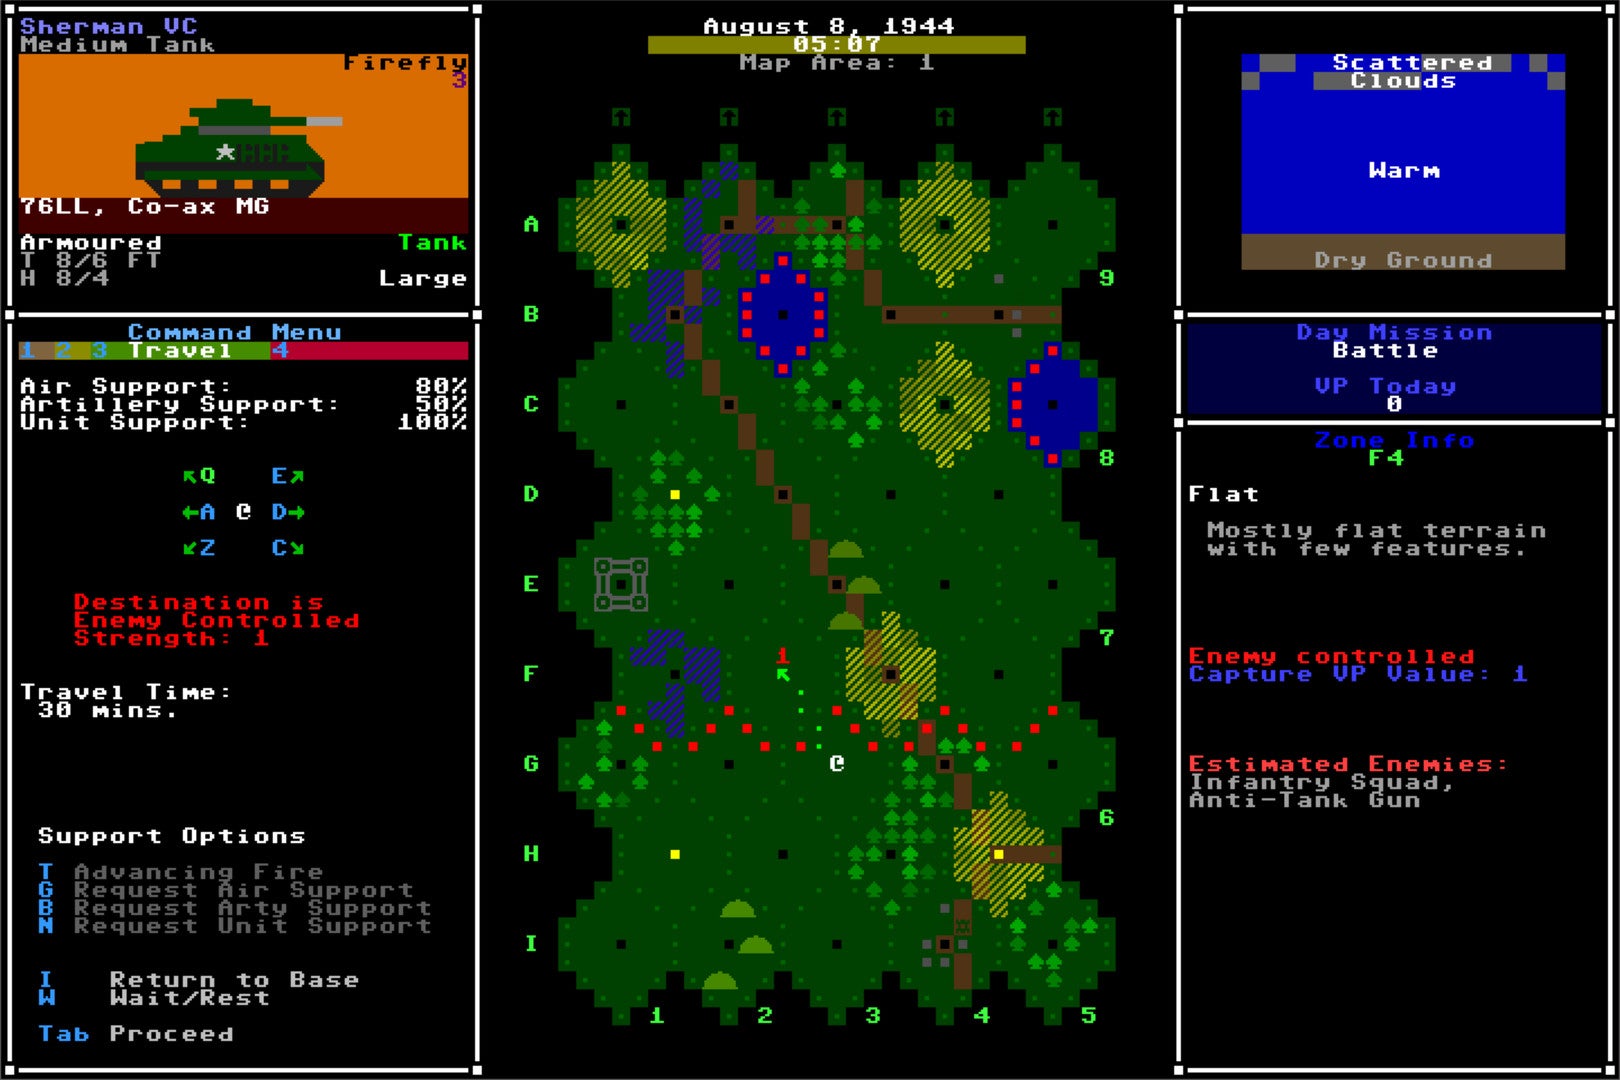 A screenshot of the ASCII interface for Armoured Commander 2, showing a battlefield from above and a lot of texty UI.